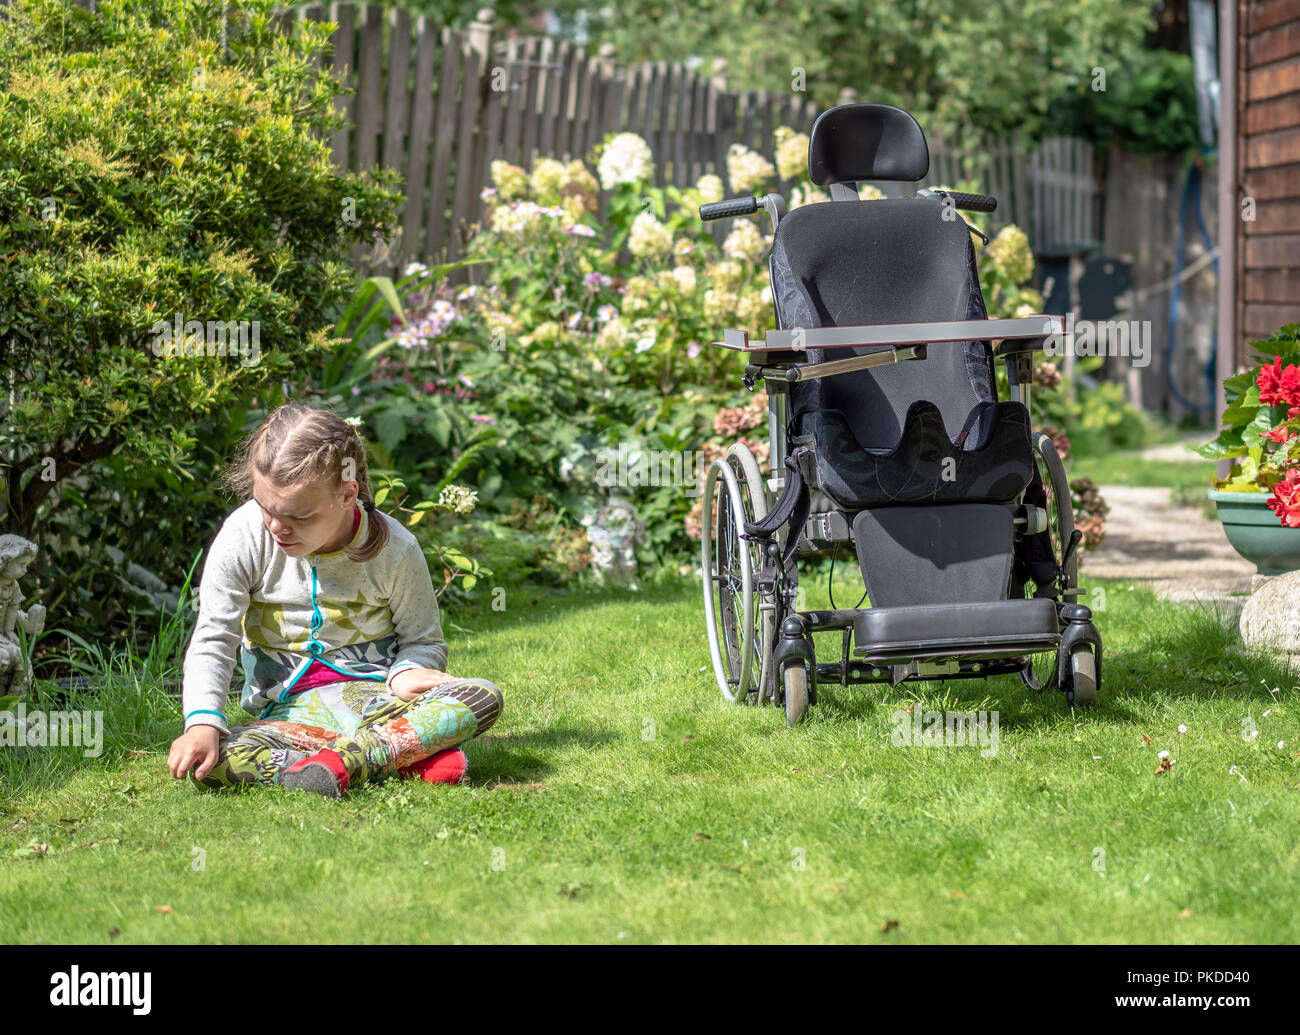 A disabled child having a break from sitting in her wheelchair to explore her natural surroundings Stock Photo